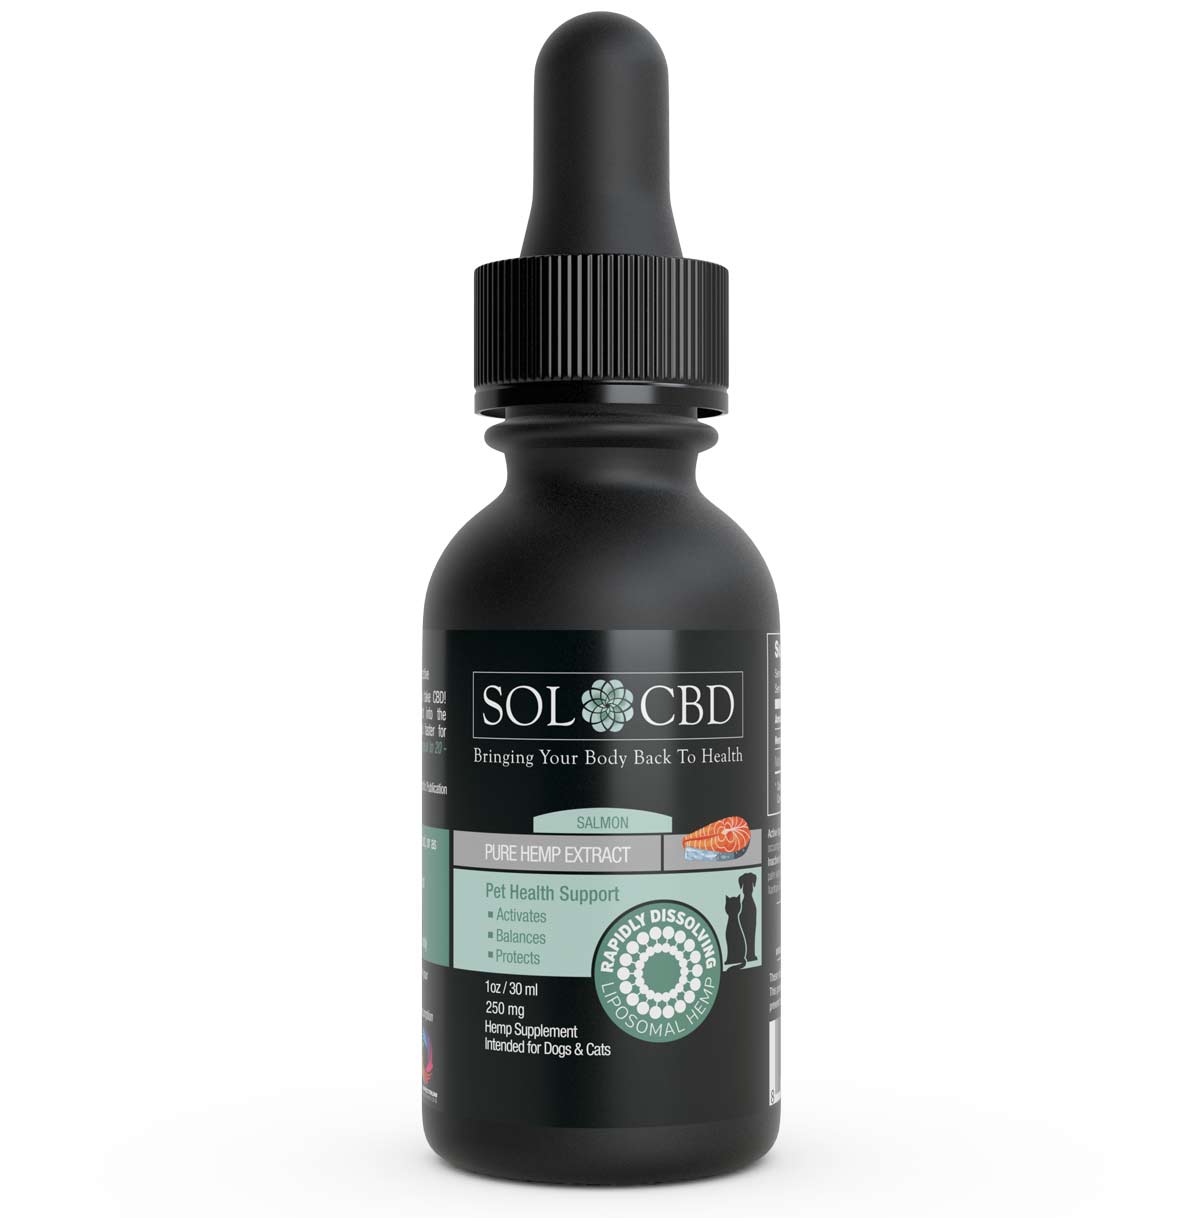 Image of Liposomal CBD Oil For Dogs and Cats